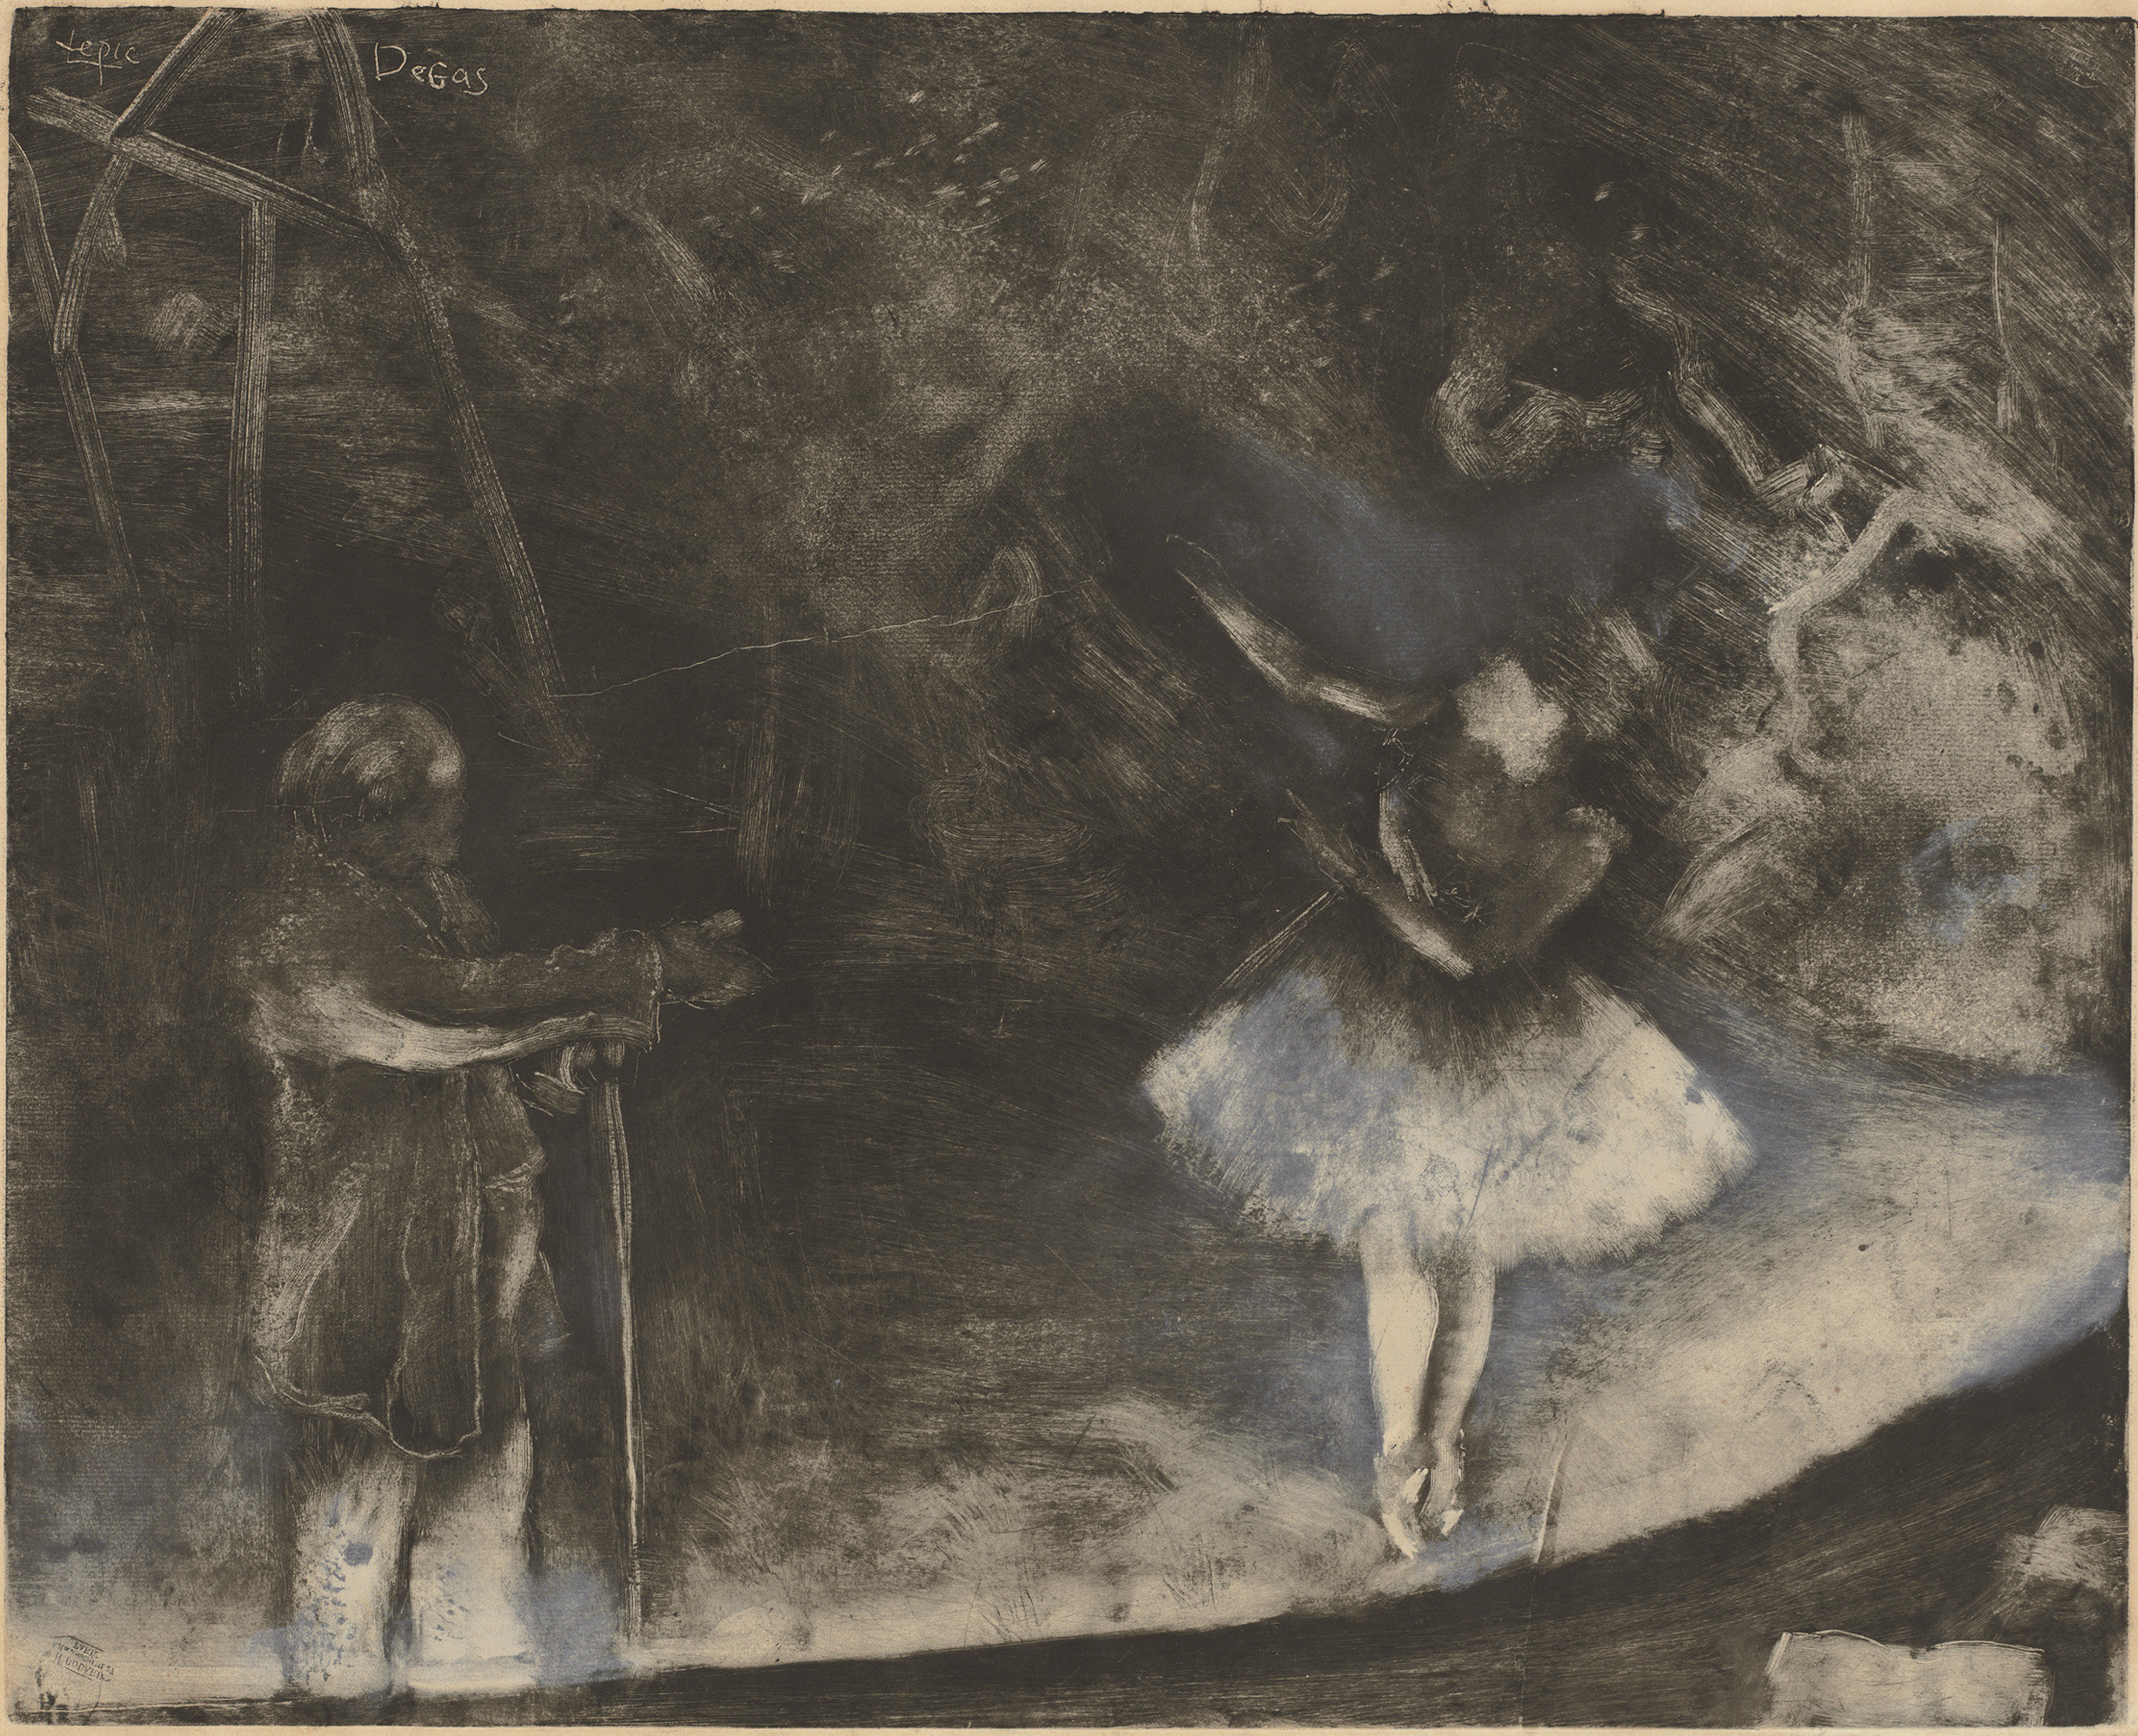 The Eternal Mystery Of Edgar Degas, A Man Obsessed With Dance HuffPost Entertainment